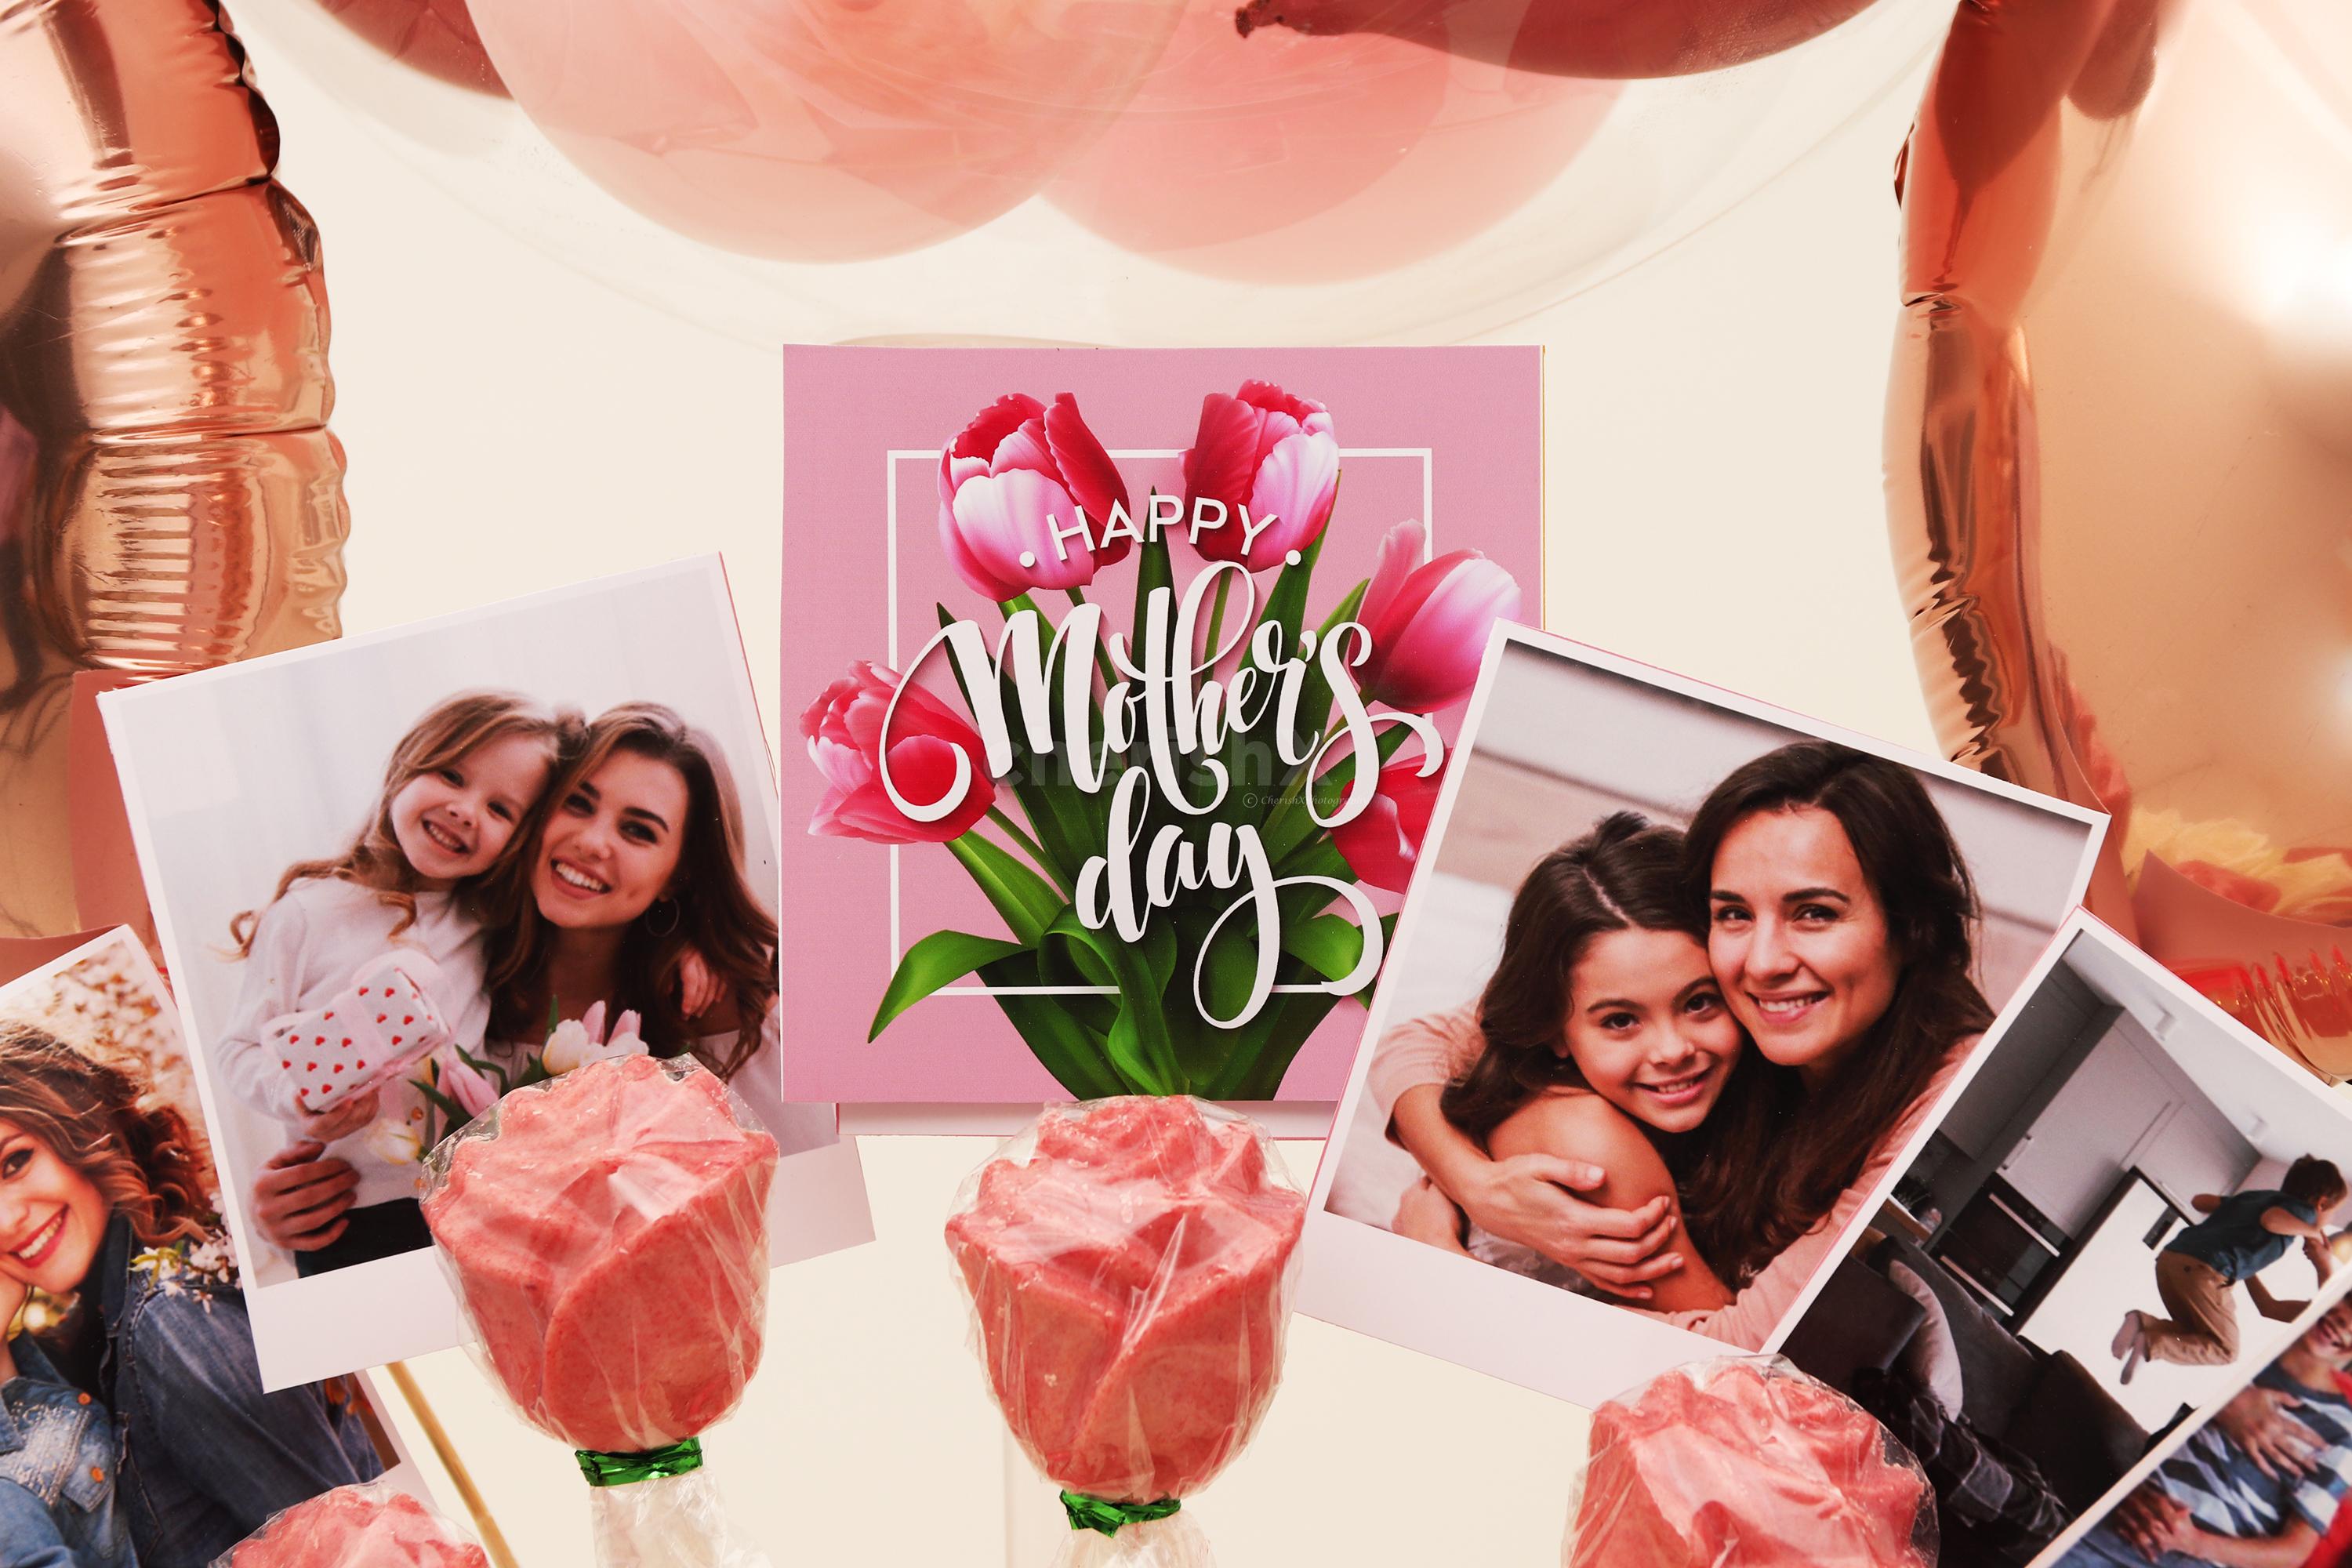 A Personalised Happy Mother's Day Gift Idea to Make your Mom Feel Extra Special!